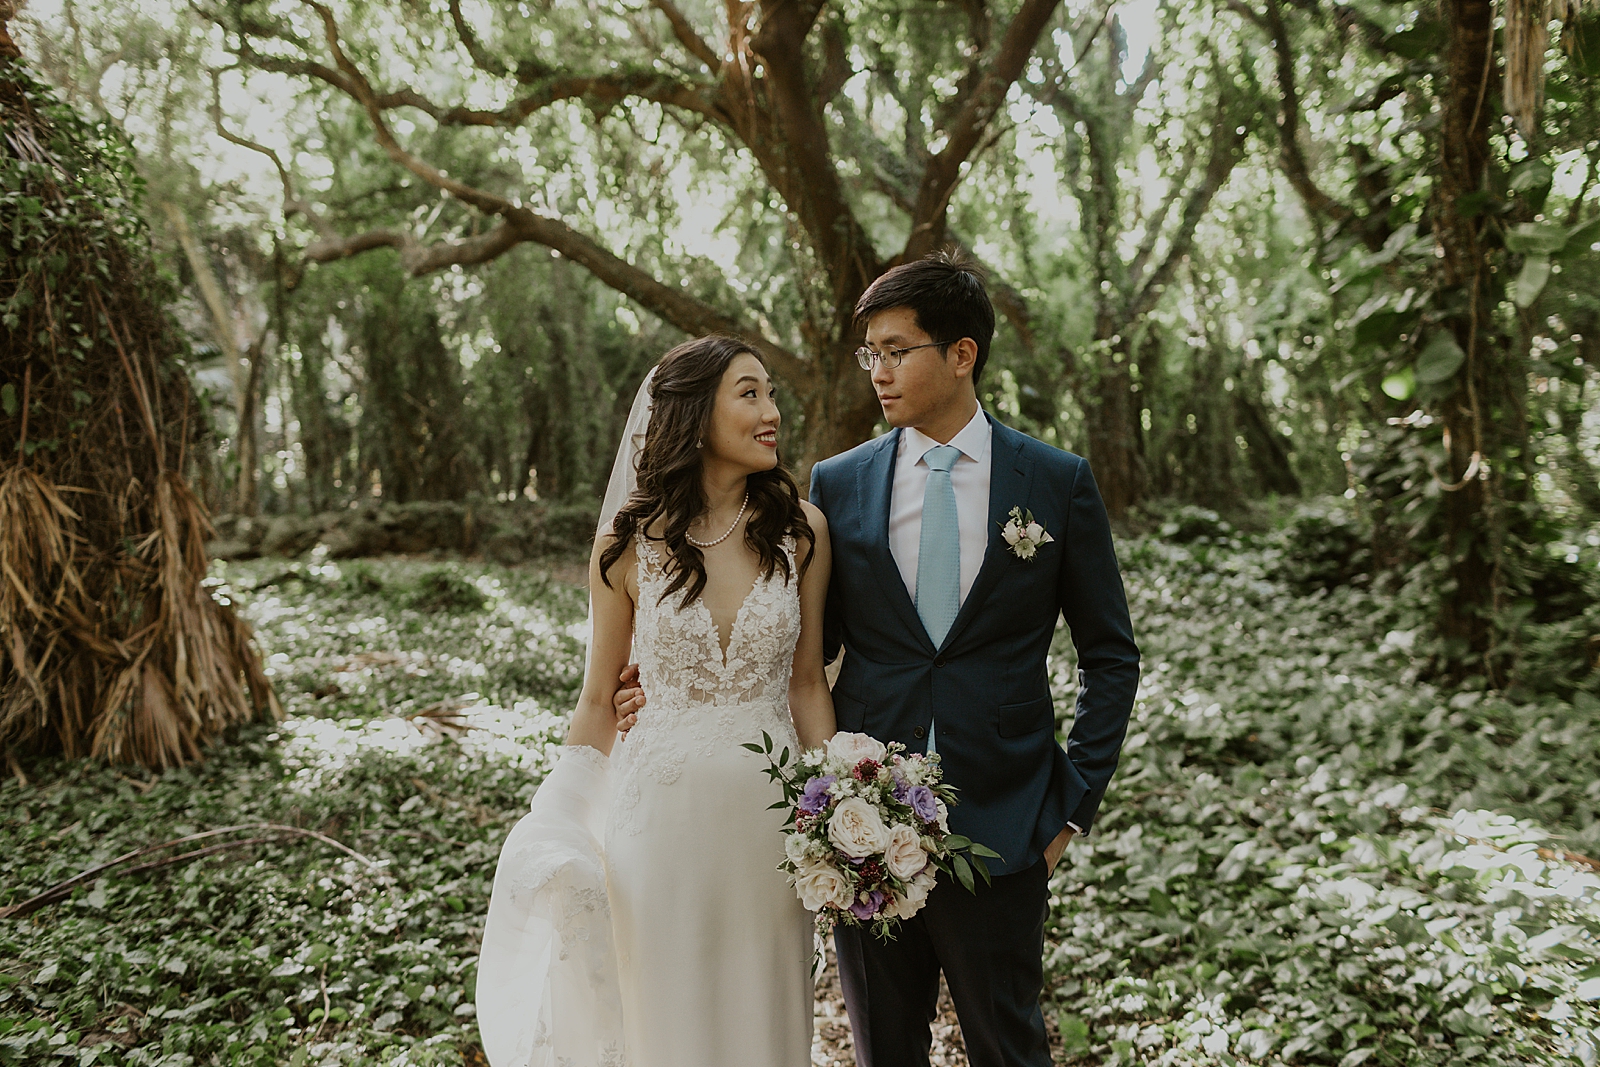 Bride and Groom side by side looking at each other surrounded by trees and greenery